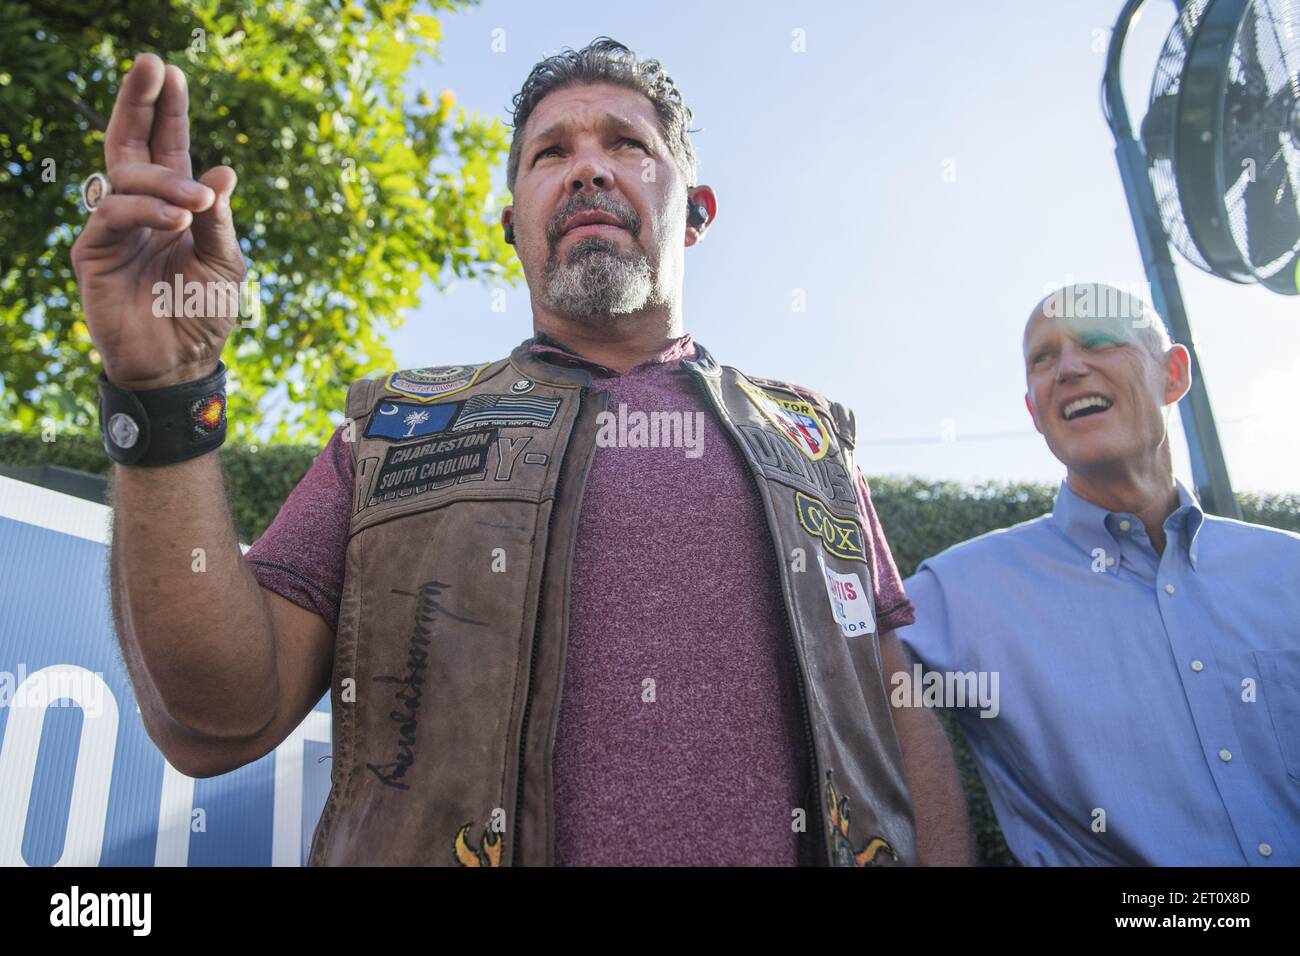 UNITED STATES - NOVEMBER 4: Chris Cox, founder of Bikers for Trump, and Florida Gov. Rick Scott (R), who is running for the U.S. Senate, attend a rally hosted by the group at the 27 Bar & Lounge in Fort Lauderdale on November 4, 2018. (Photo By Tom Williams/CQ Roll Call) Stock Photo